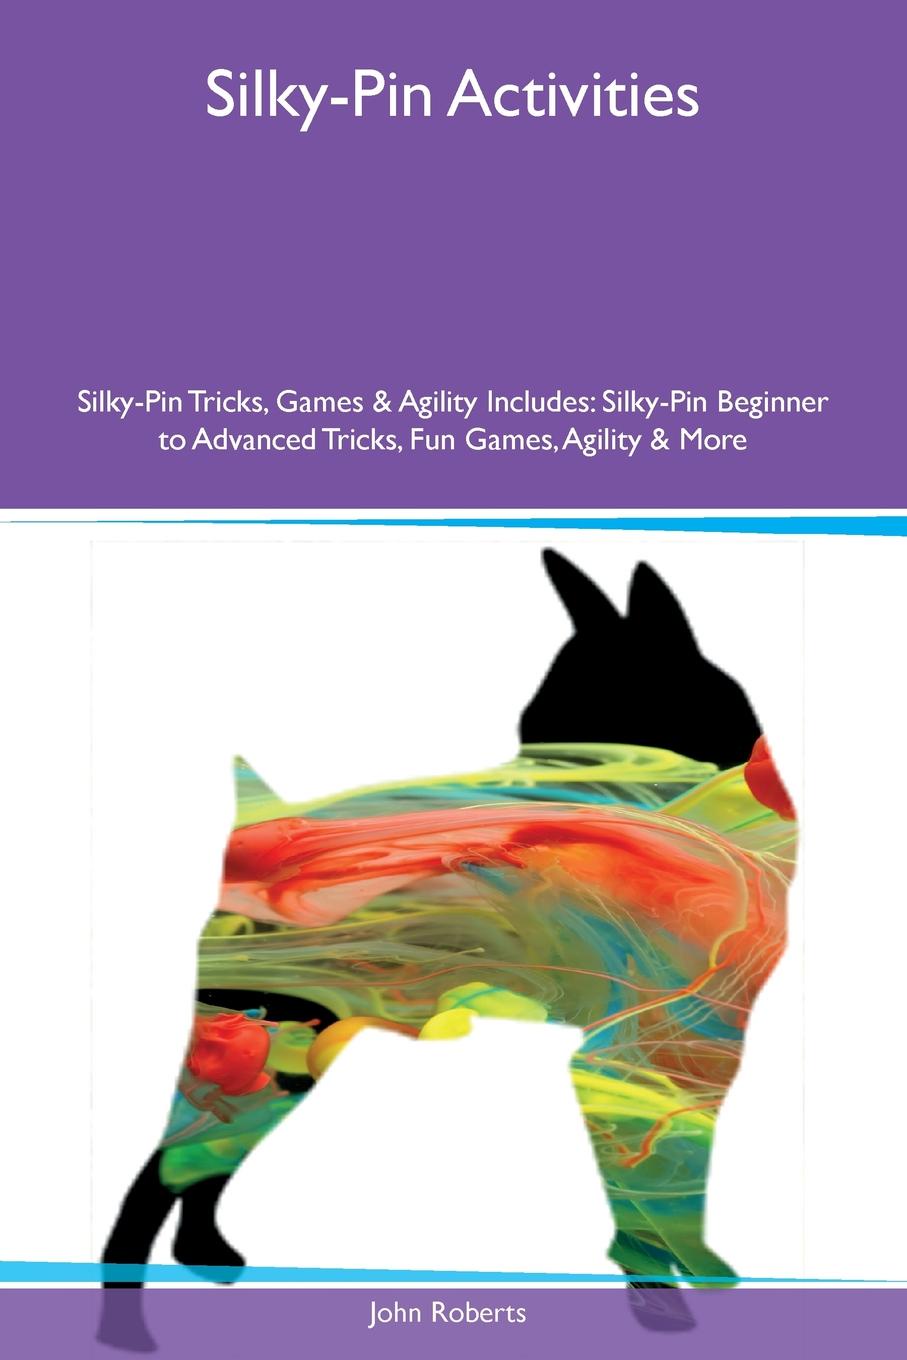 Silky-Pin Activities Silky-Pin Tricks, Games & Agility Includes. Silky-Pin Beginner to Advanced Tricks, Fun Games, Agility & More